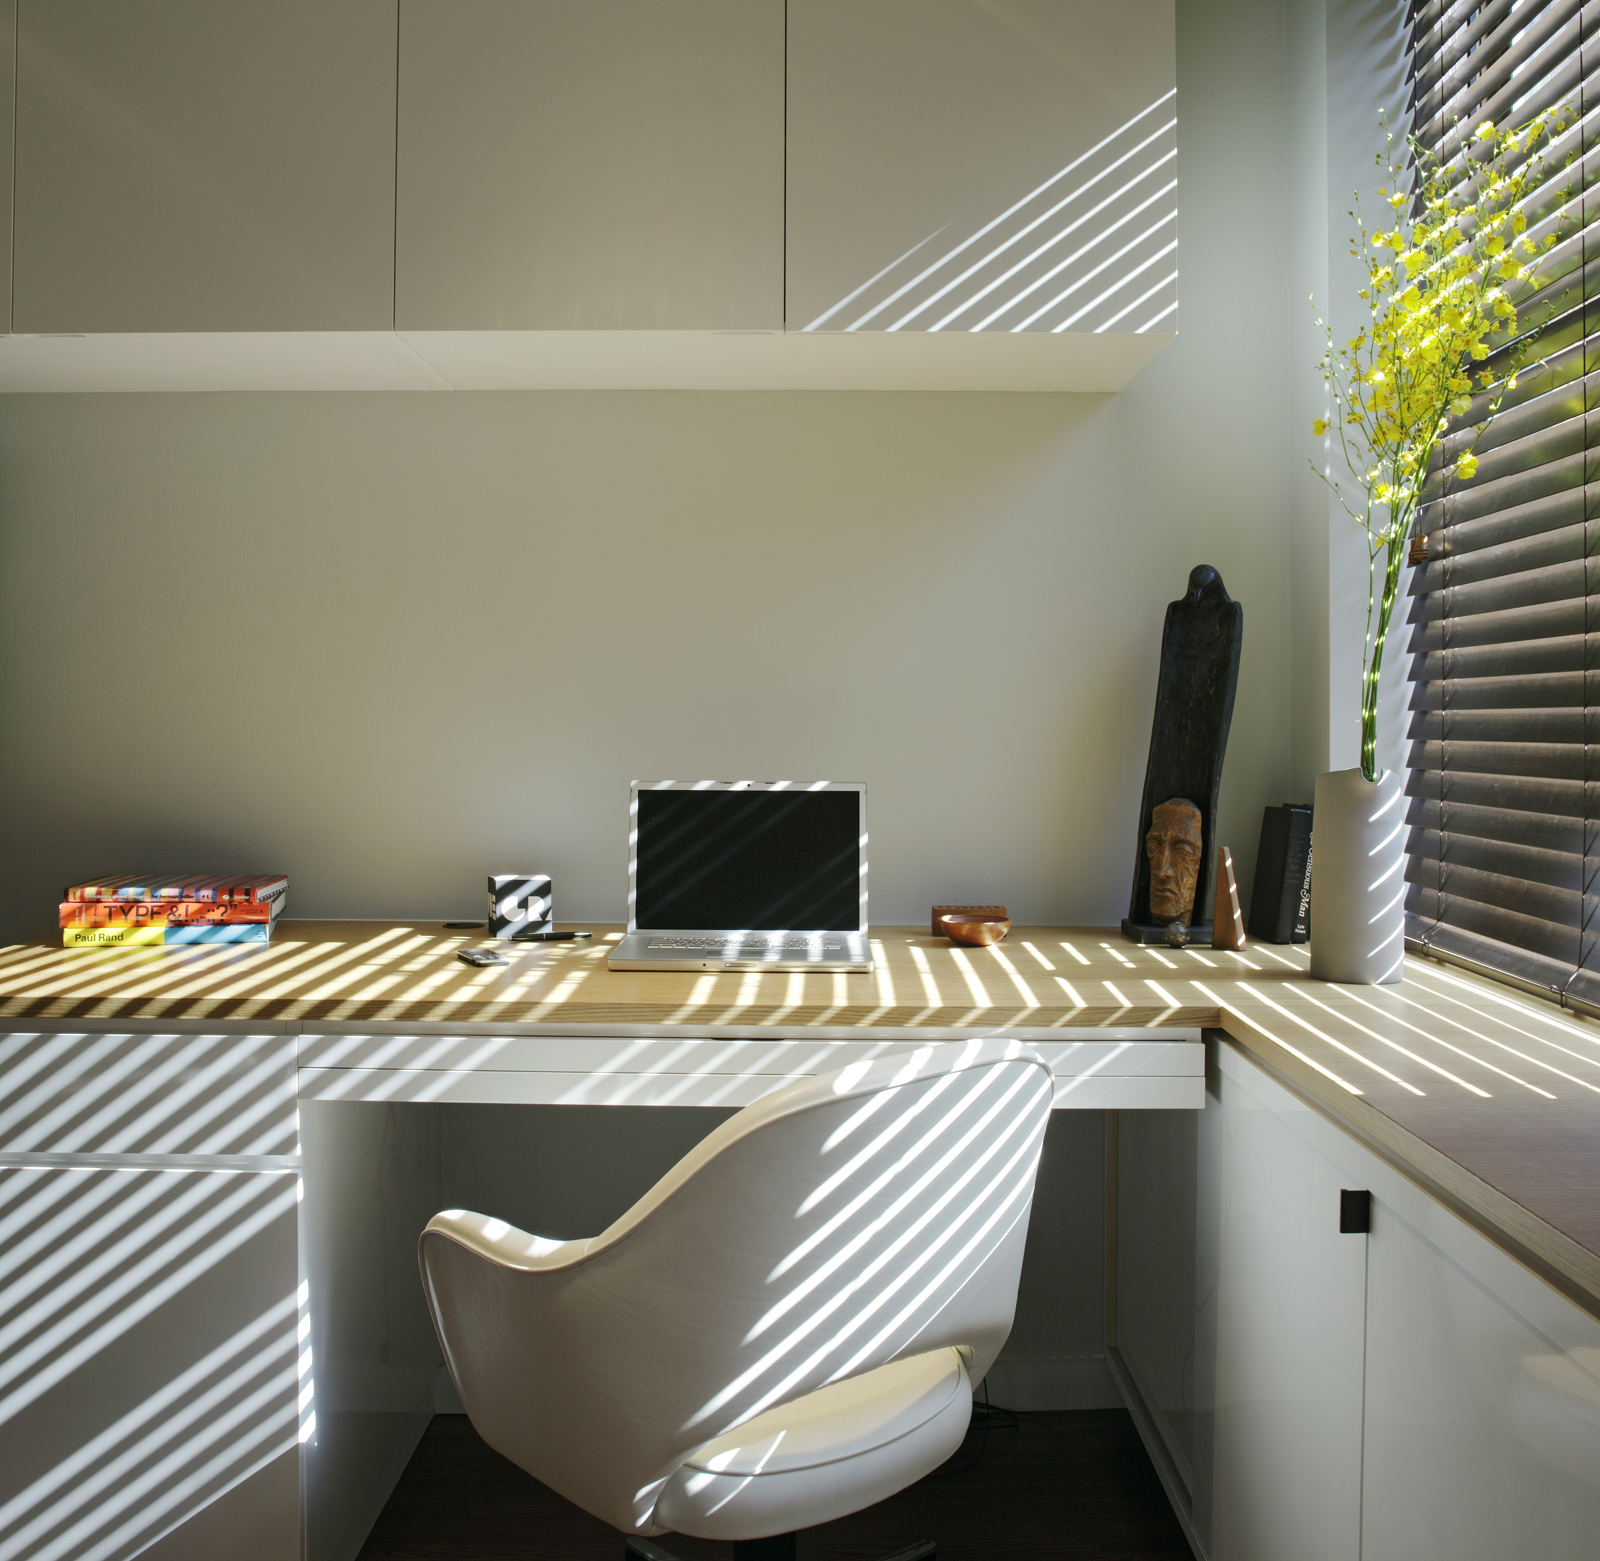 A Built-In Workspace to Hide and Organize the Clutter